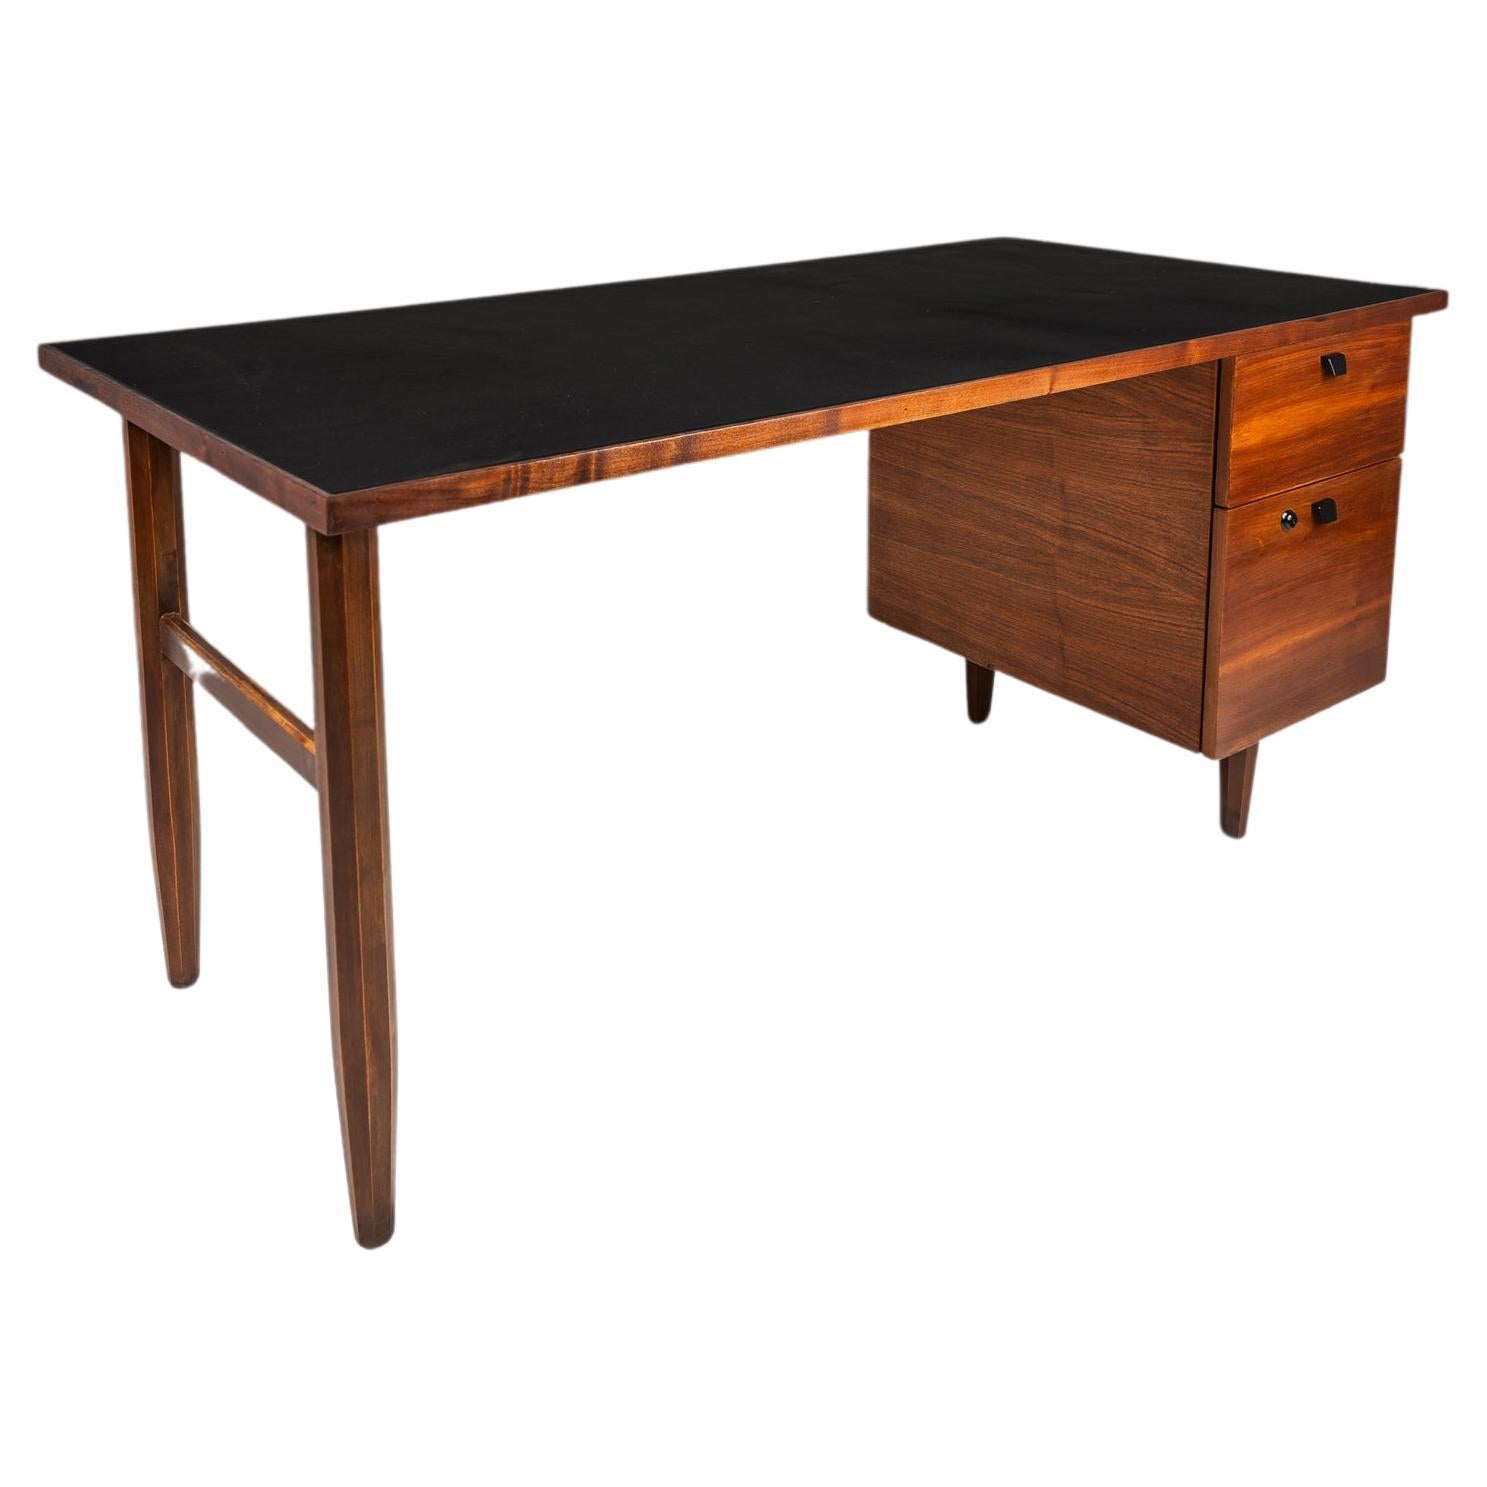 Restored Mid-Century Modern Writers Desk in Walnut with Leather Top, USA, 1960's For Sale